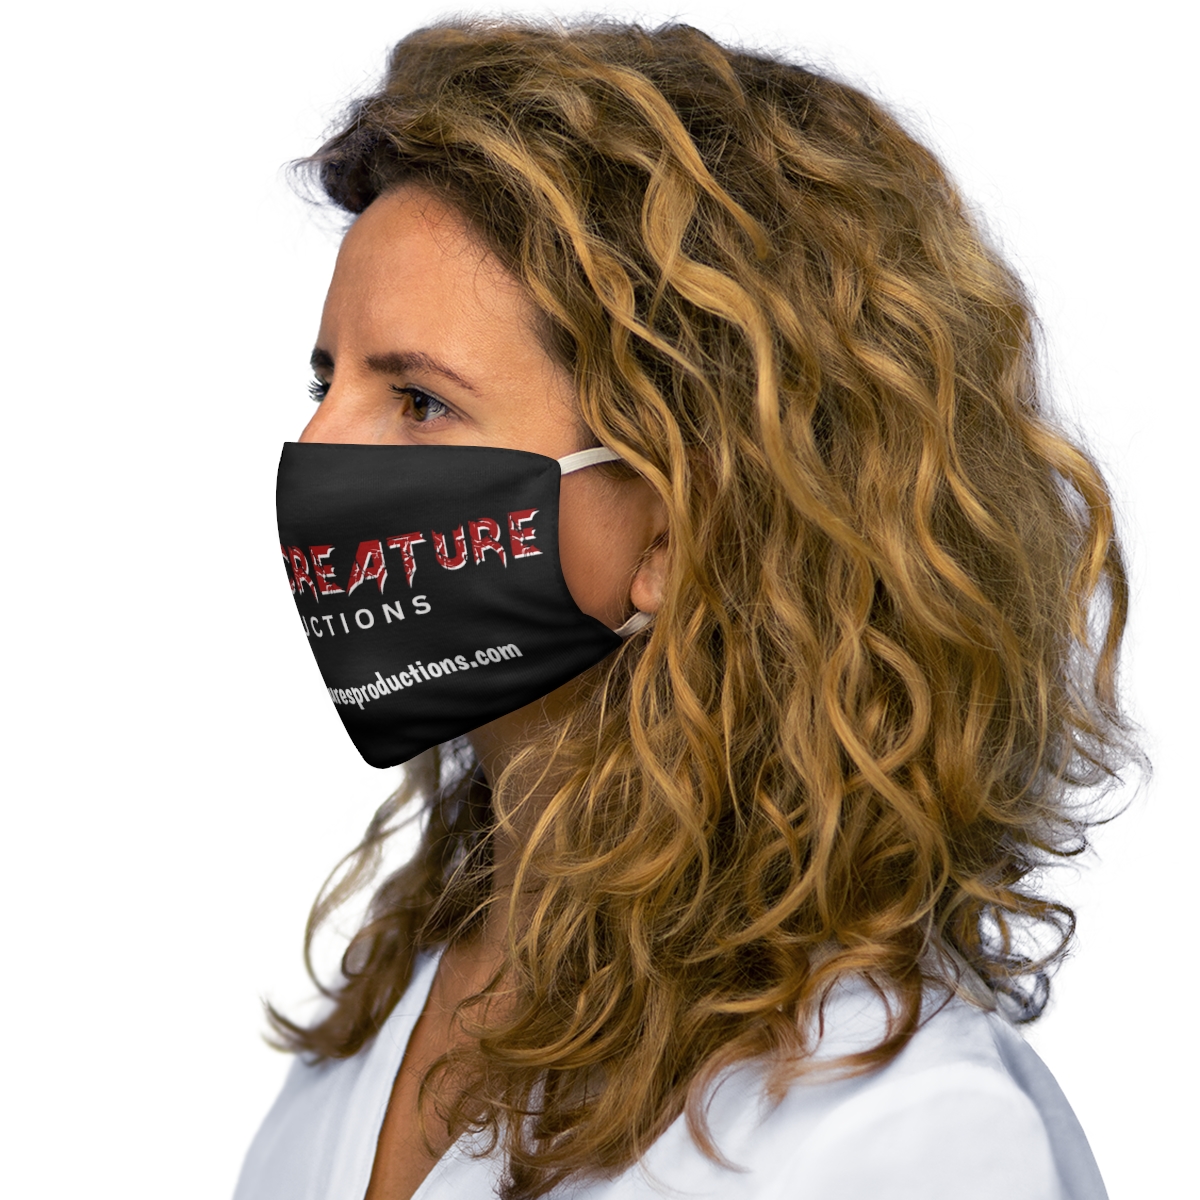 NIGHT CREATURE PRODUCTIONS logo Snug-Fit Polyester Face Mask product thumbnail image